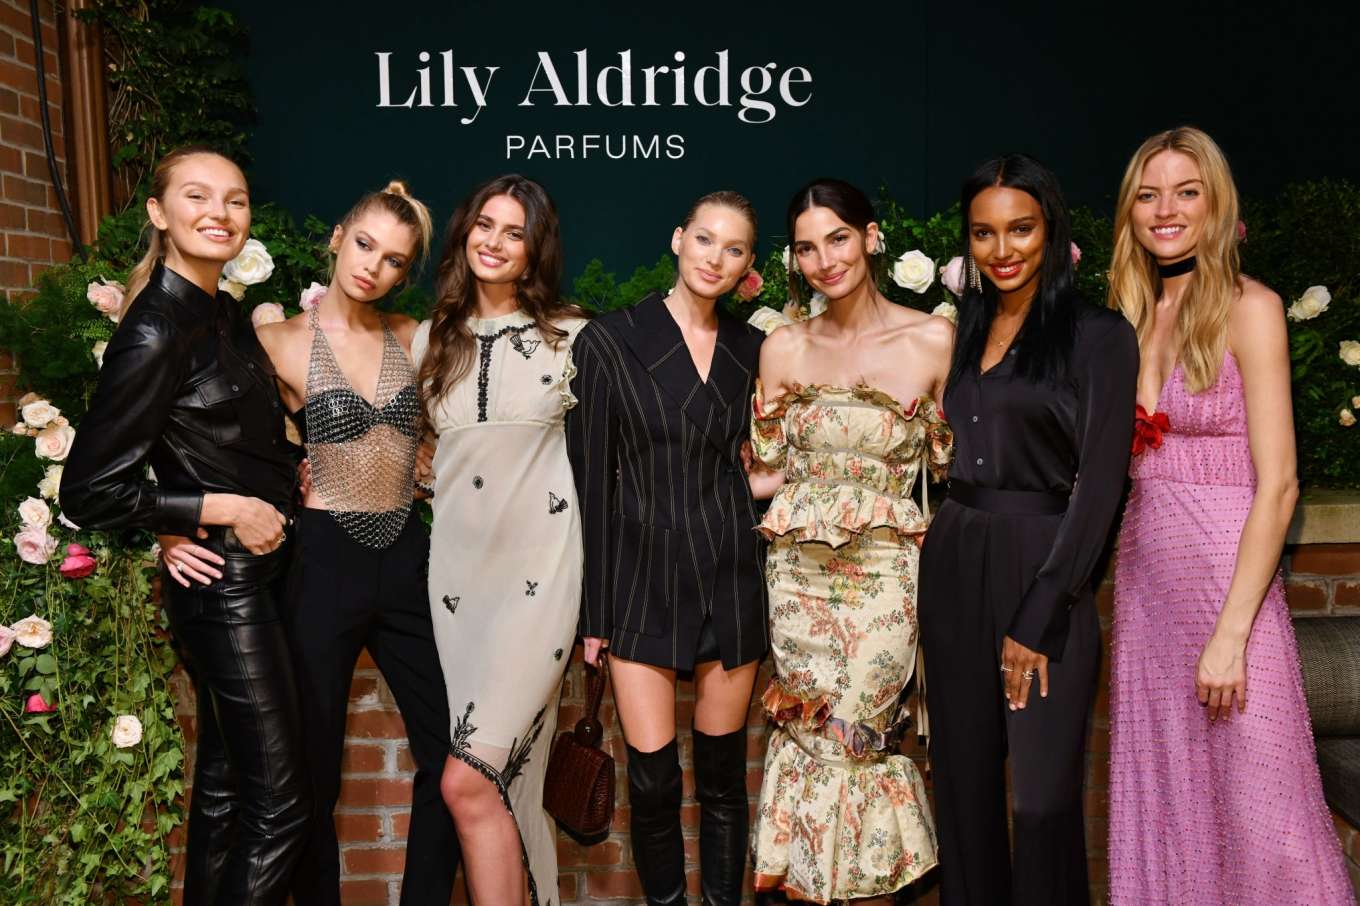 Taylor Hill 2019 : Taylor Hill – Lily Aldridge Parfums Launch Event in NYC-02